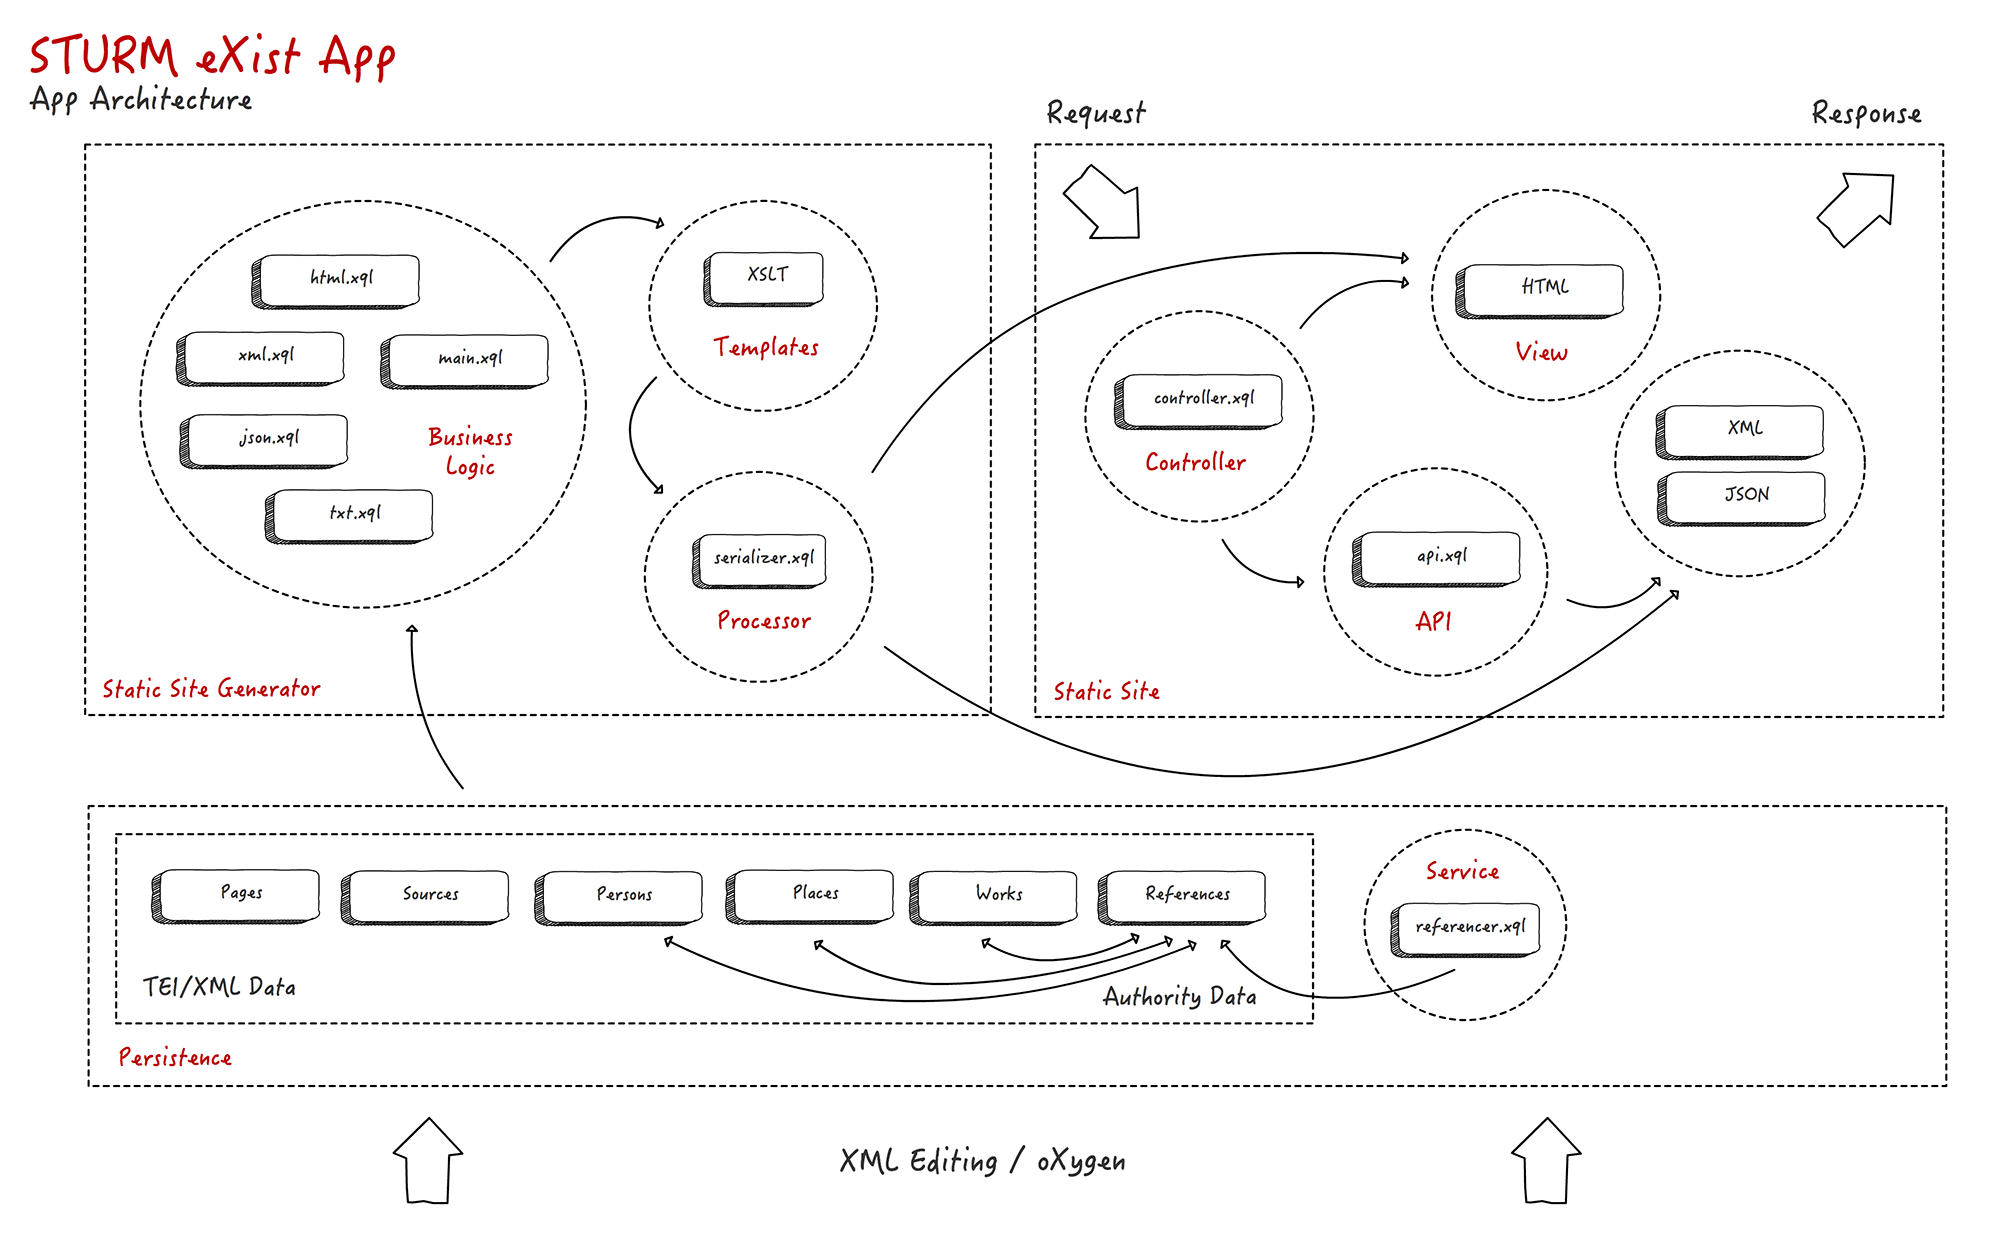 Diagramm of the eXist application